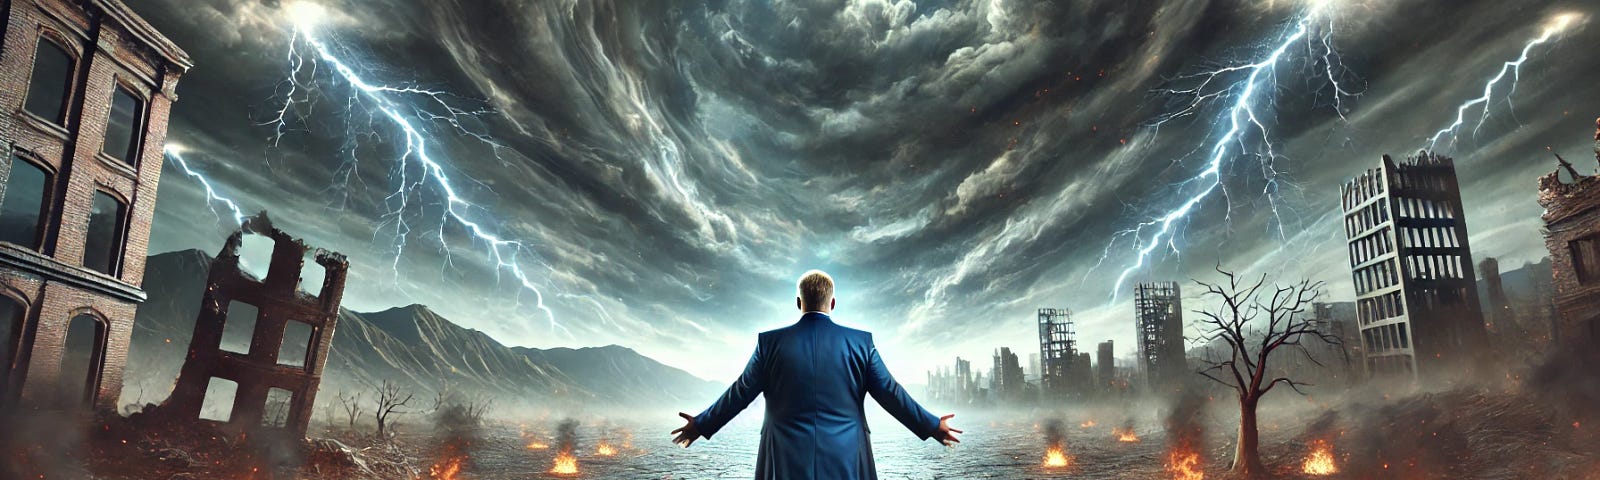 MAGA and the Messiah, shows Trump standing before the apocalypse because the MAGA claim he’s Jesus.